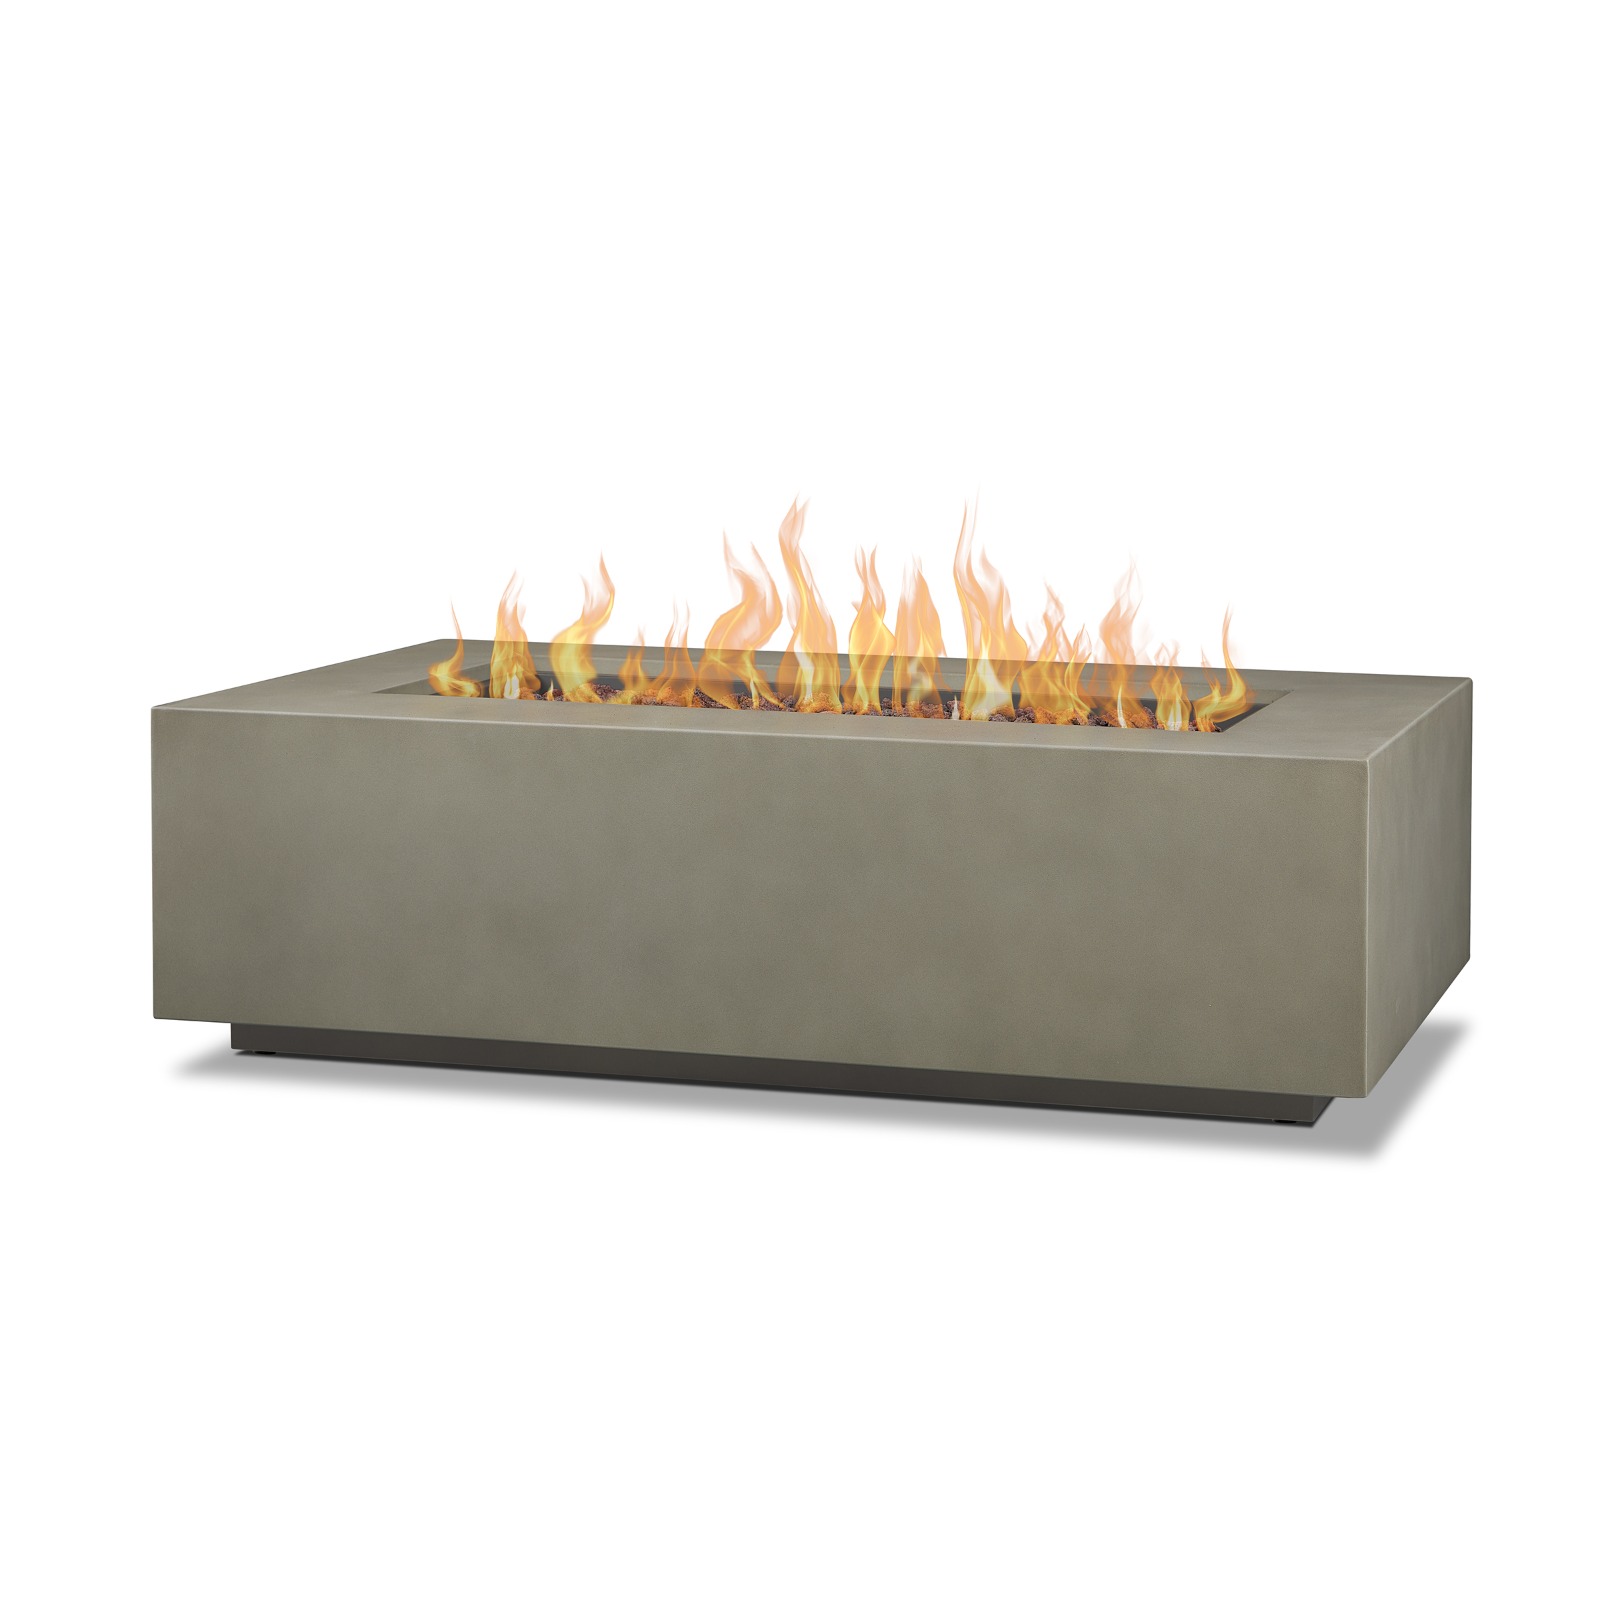 Aegean 50" Rectangle Propane Fire Pit Outdoor Fireplace Fire Table for Backyard or Patio